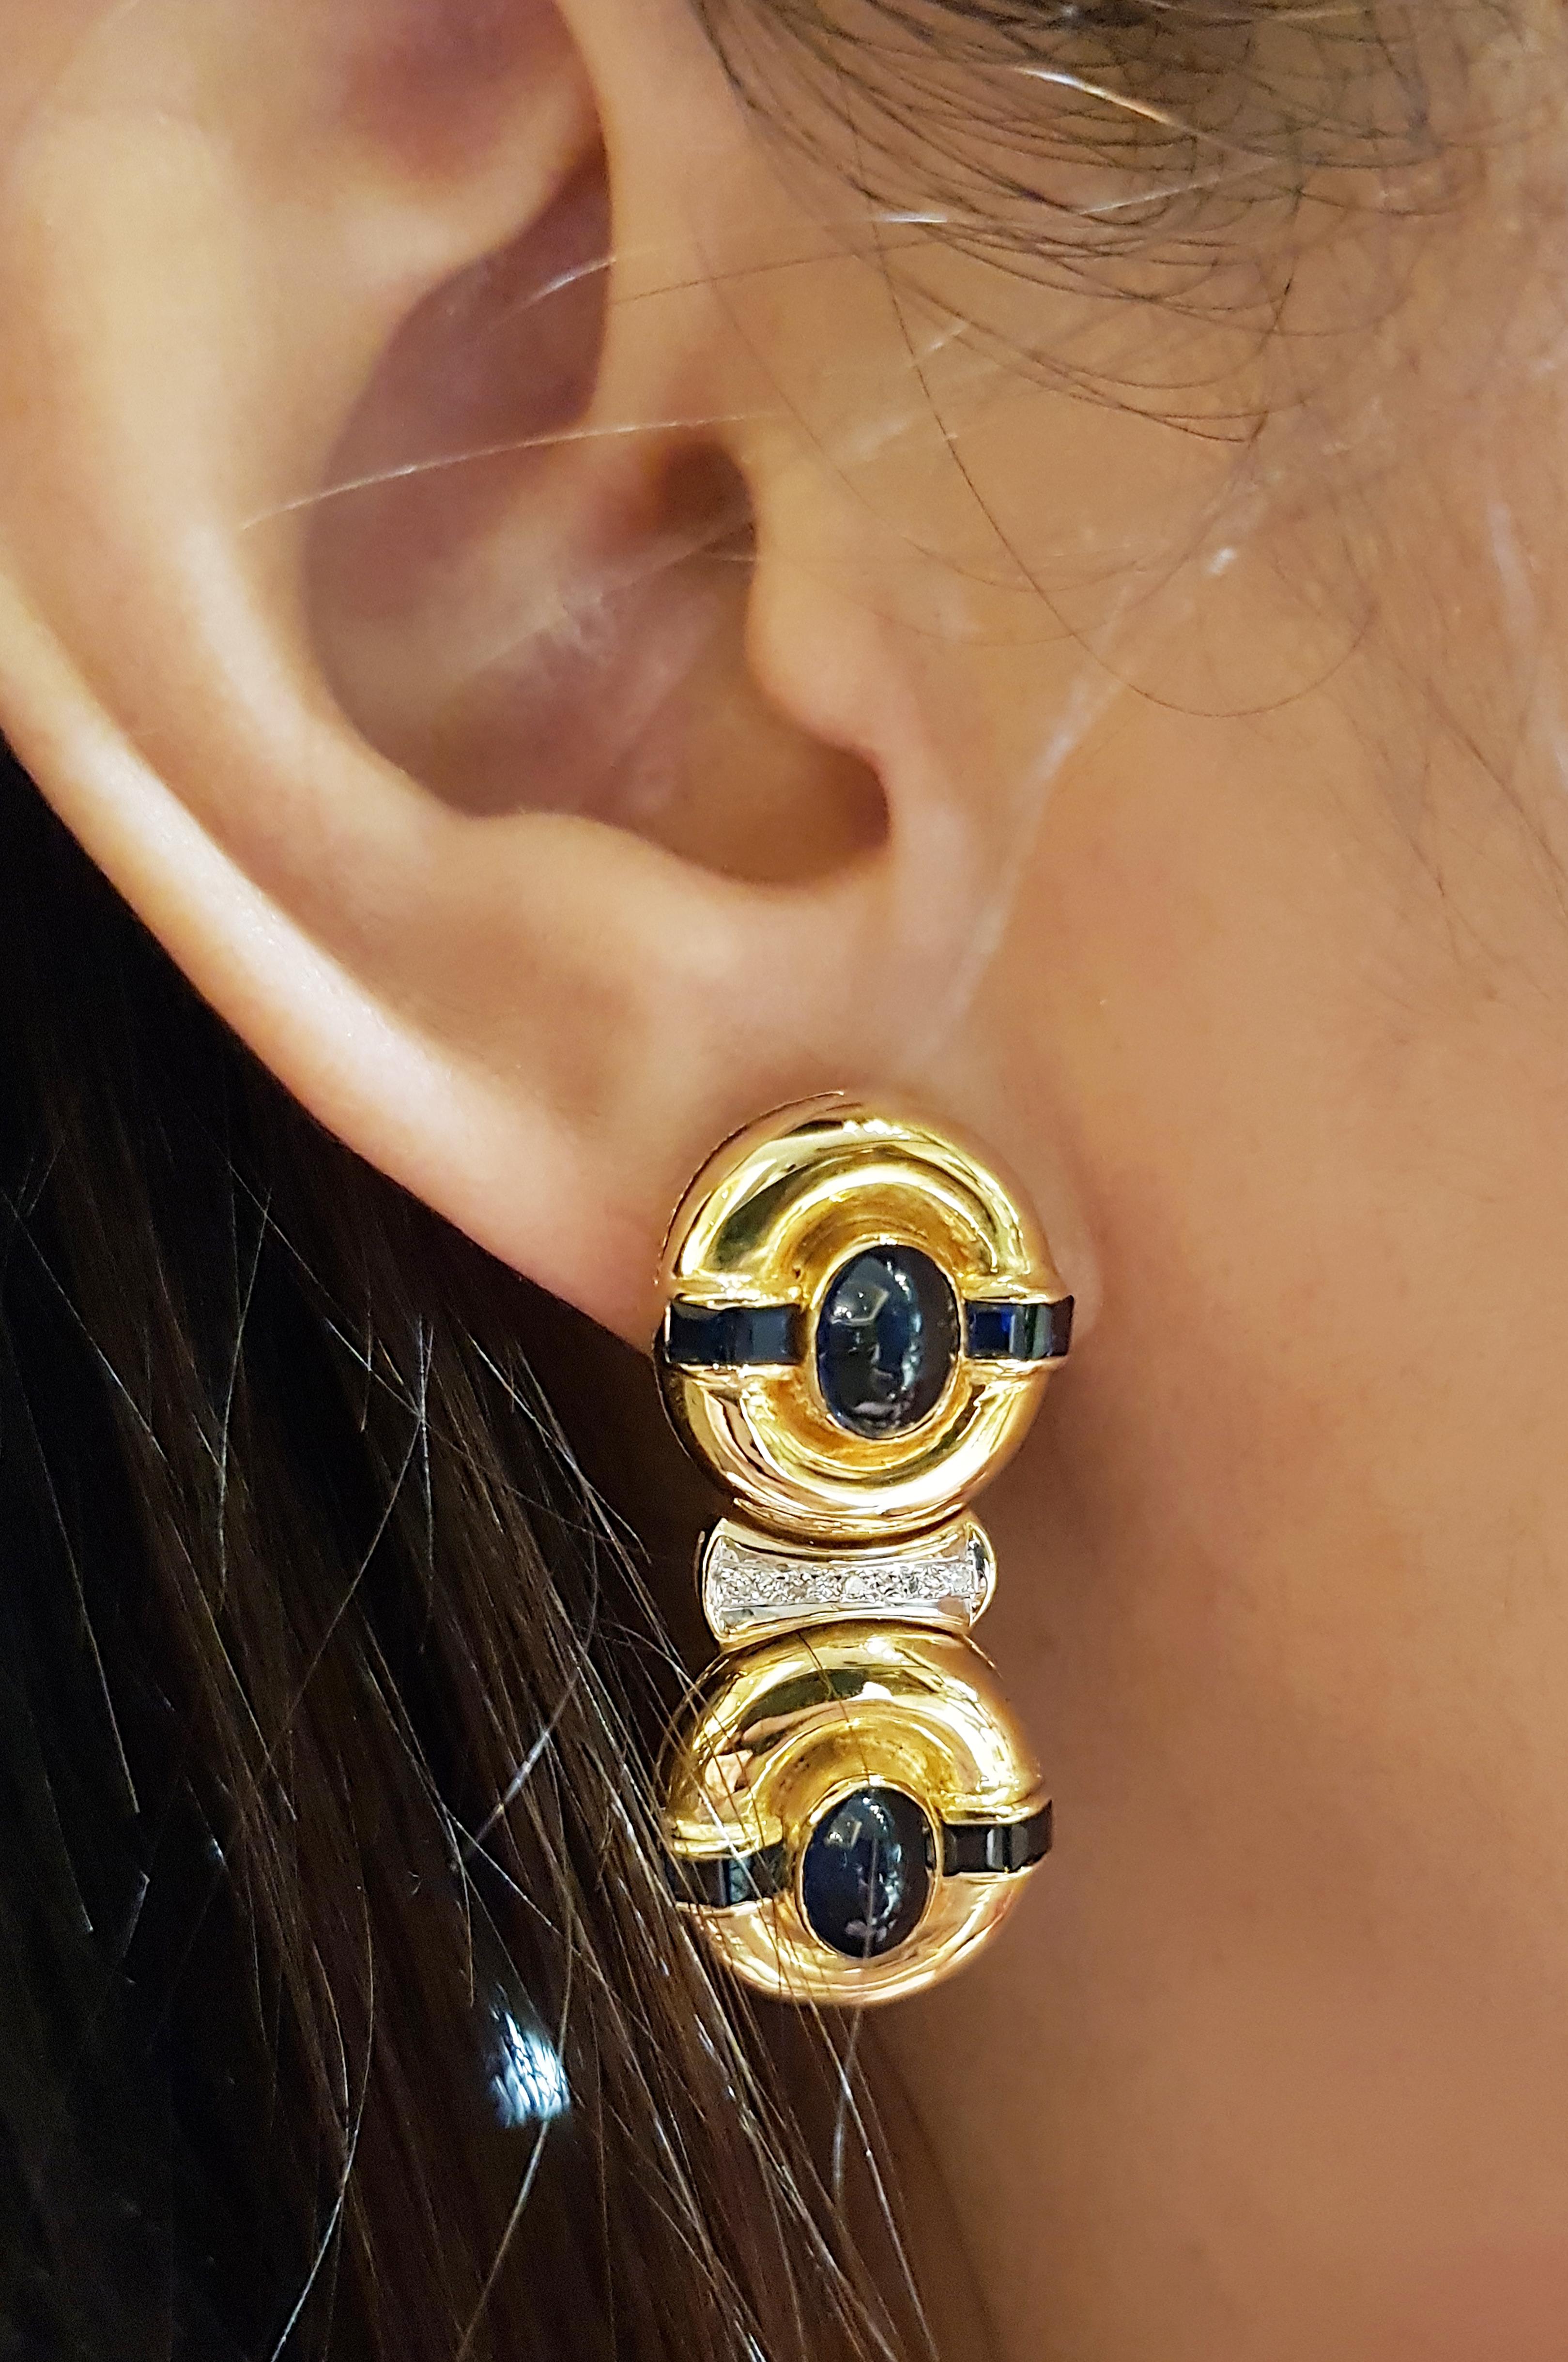 Cabochon Blue Sapphire 5.92 carats with Diamond 0.67 carat and Blue Sapphire 1.67 carats Earrings set in 18 Karat Gold Settings

Width:  1.5 cm 
Length: 3.5 cm
Total Weight: 18.64 grams

